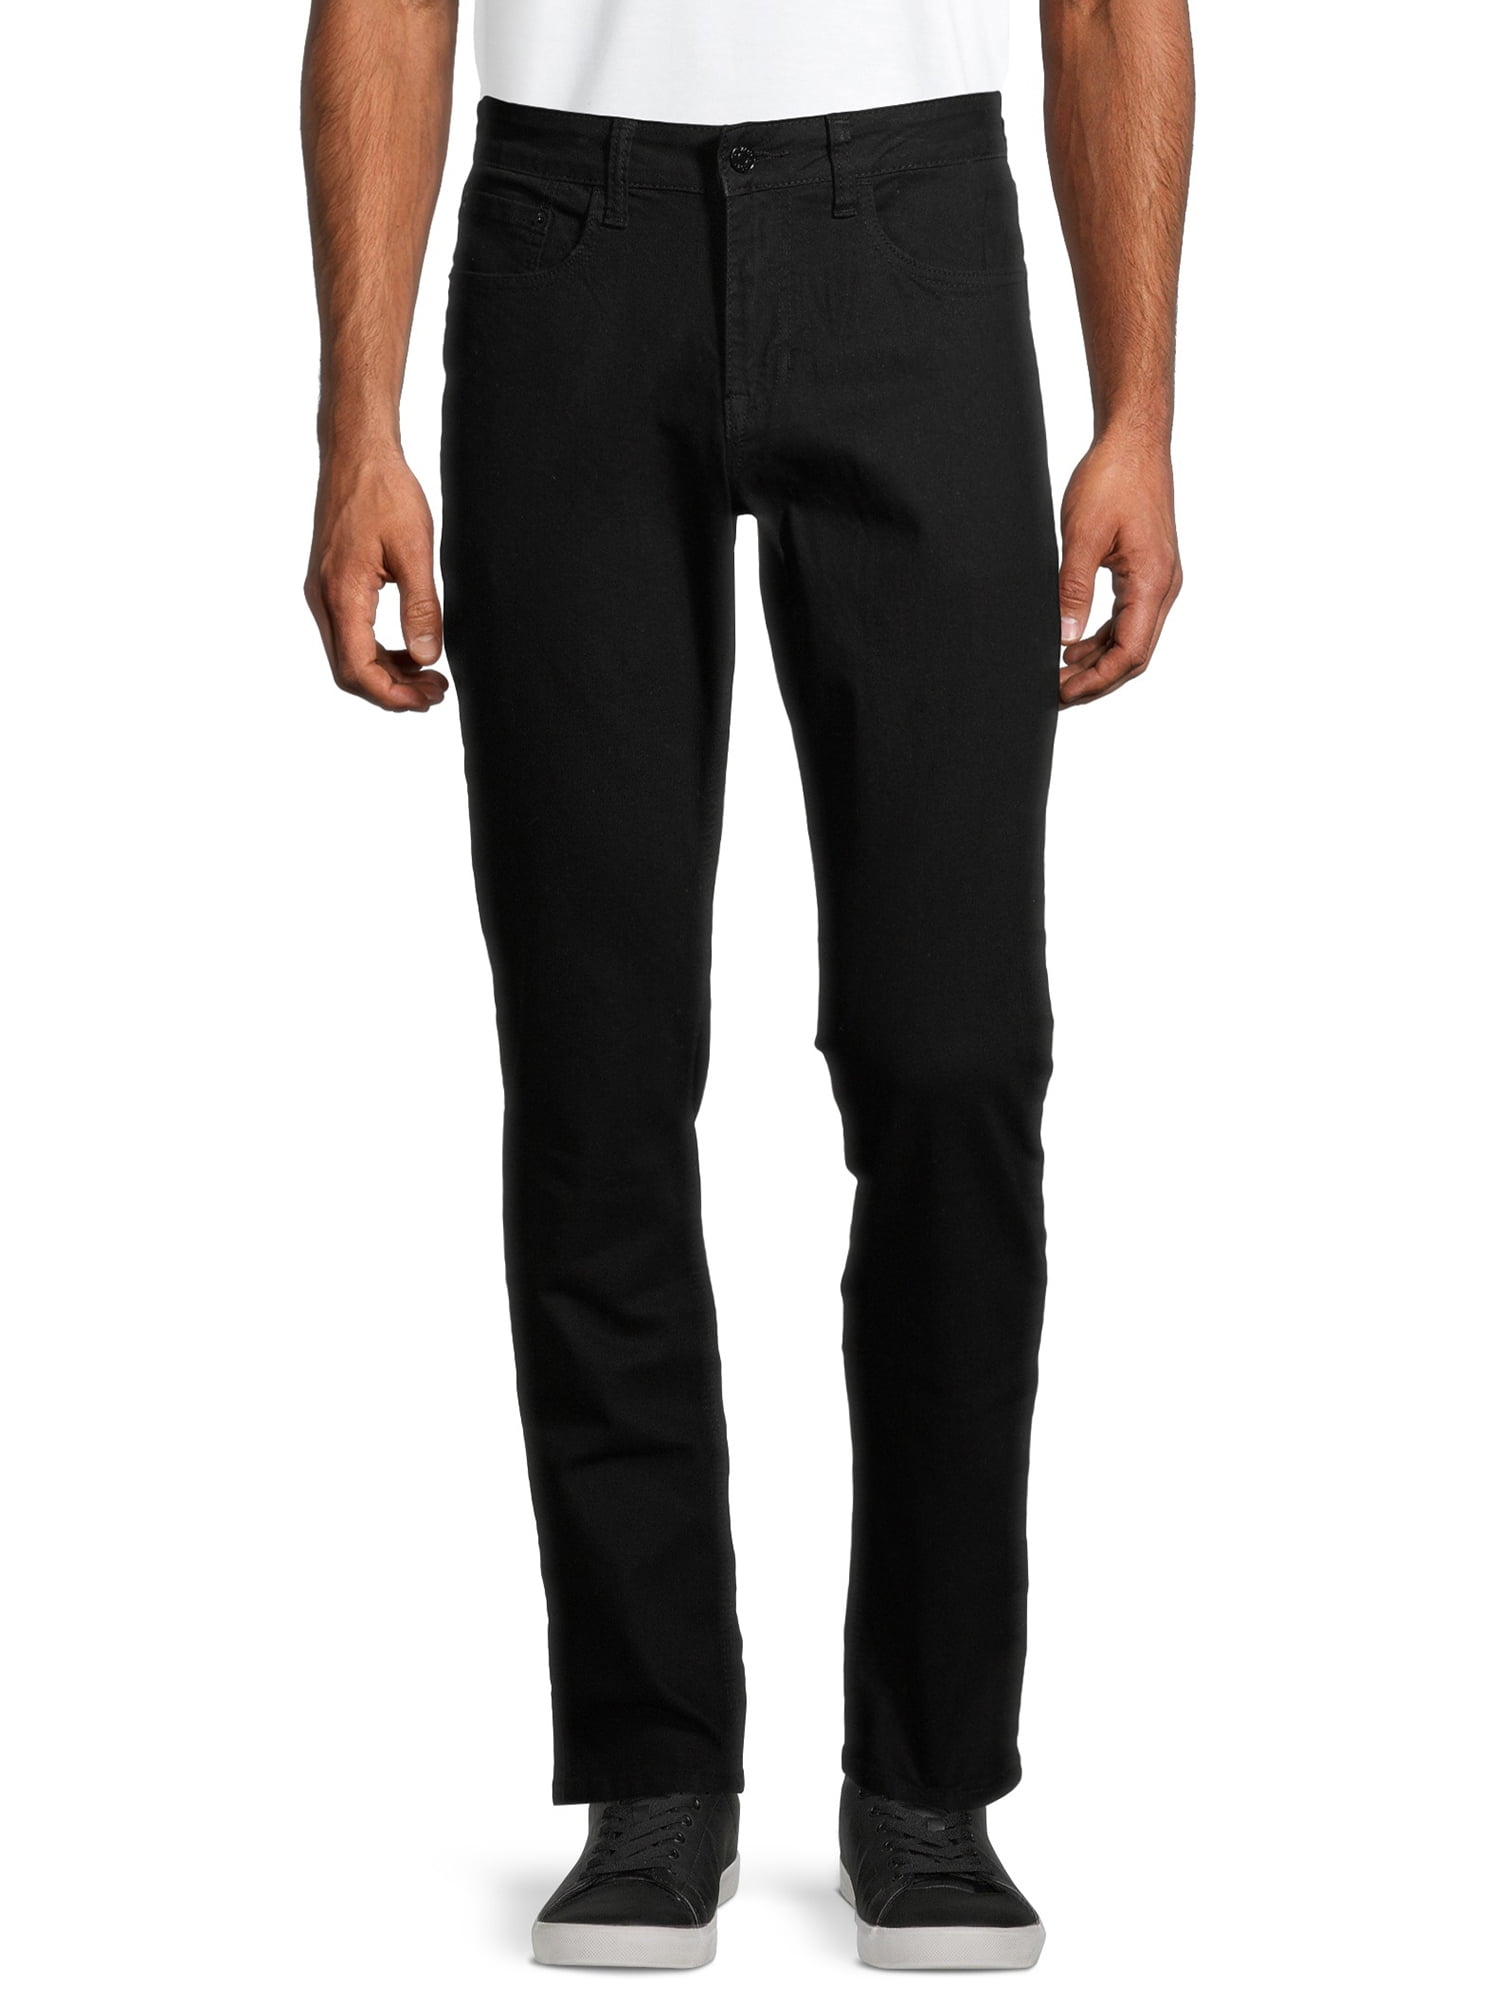 NWT Men's Black HAGGAR In Motion Straight Fit Performance Stretch Pants 36X32 